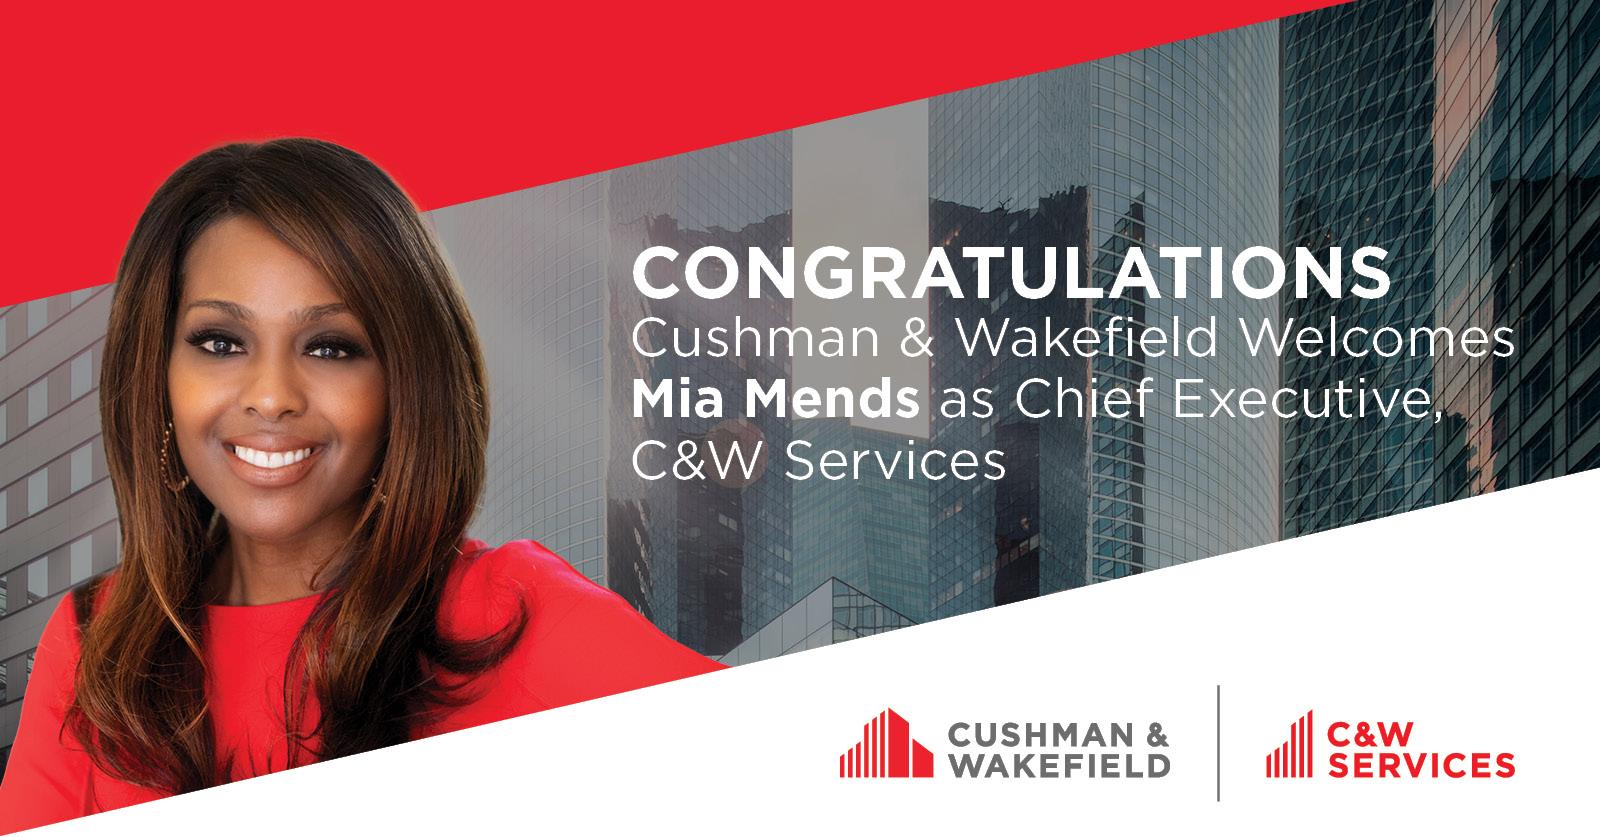 Congratulations to mrs mimi mendez as chief executive services.